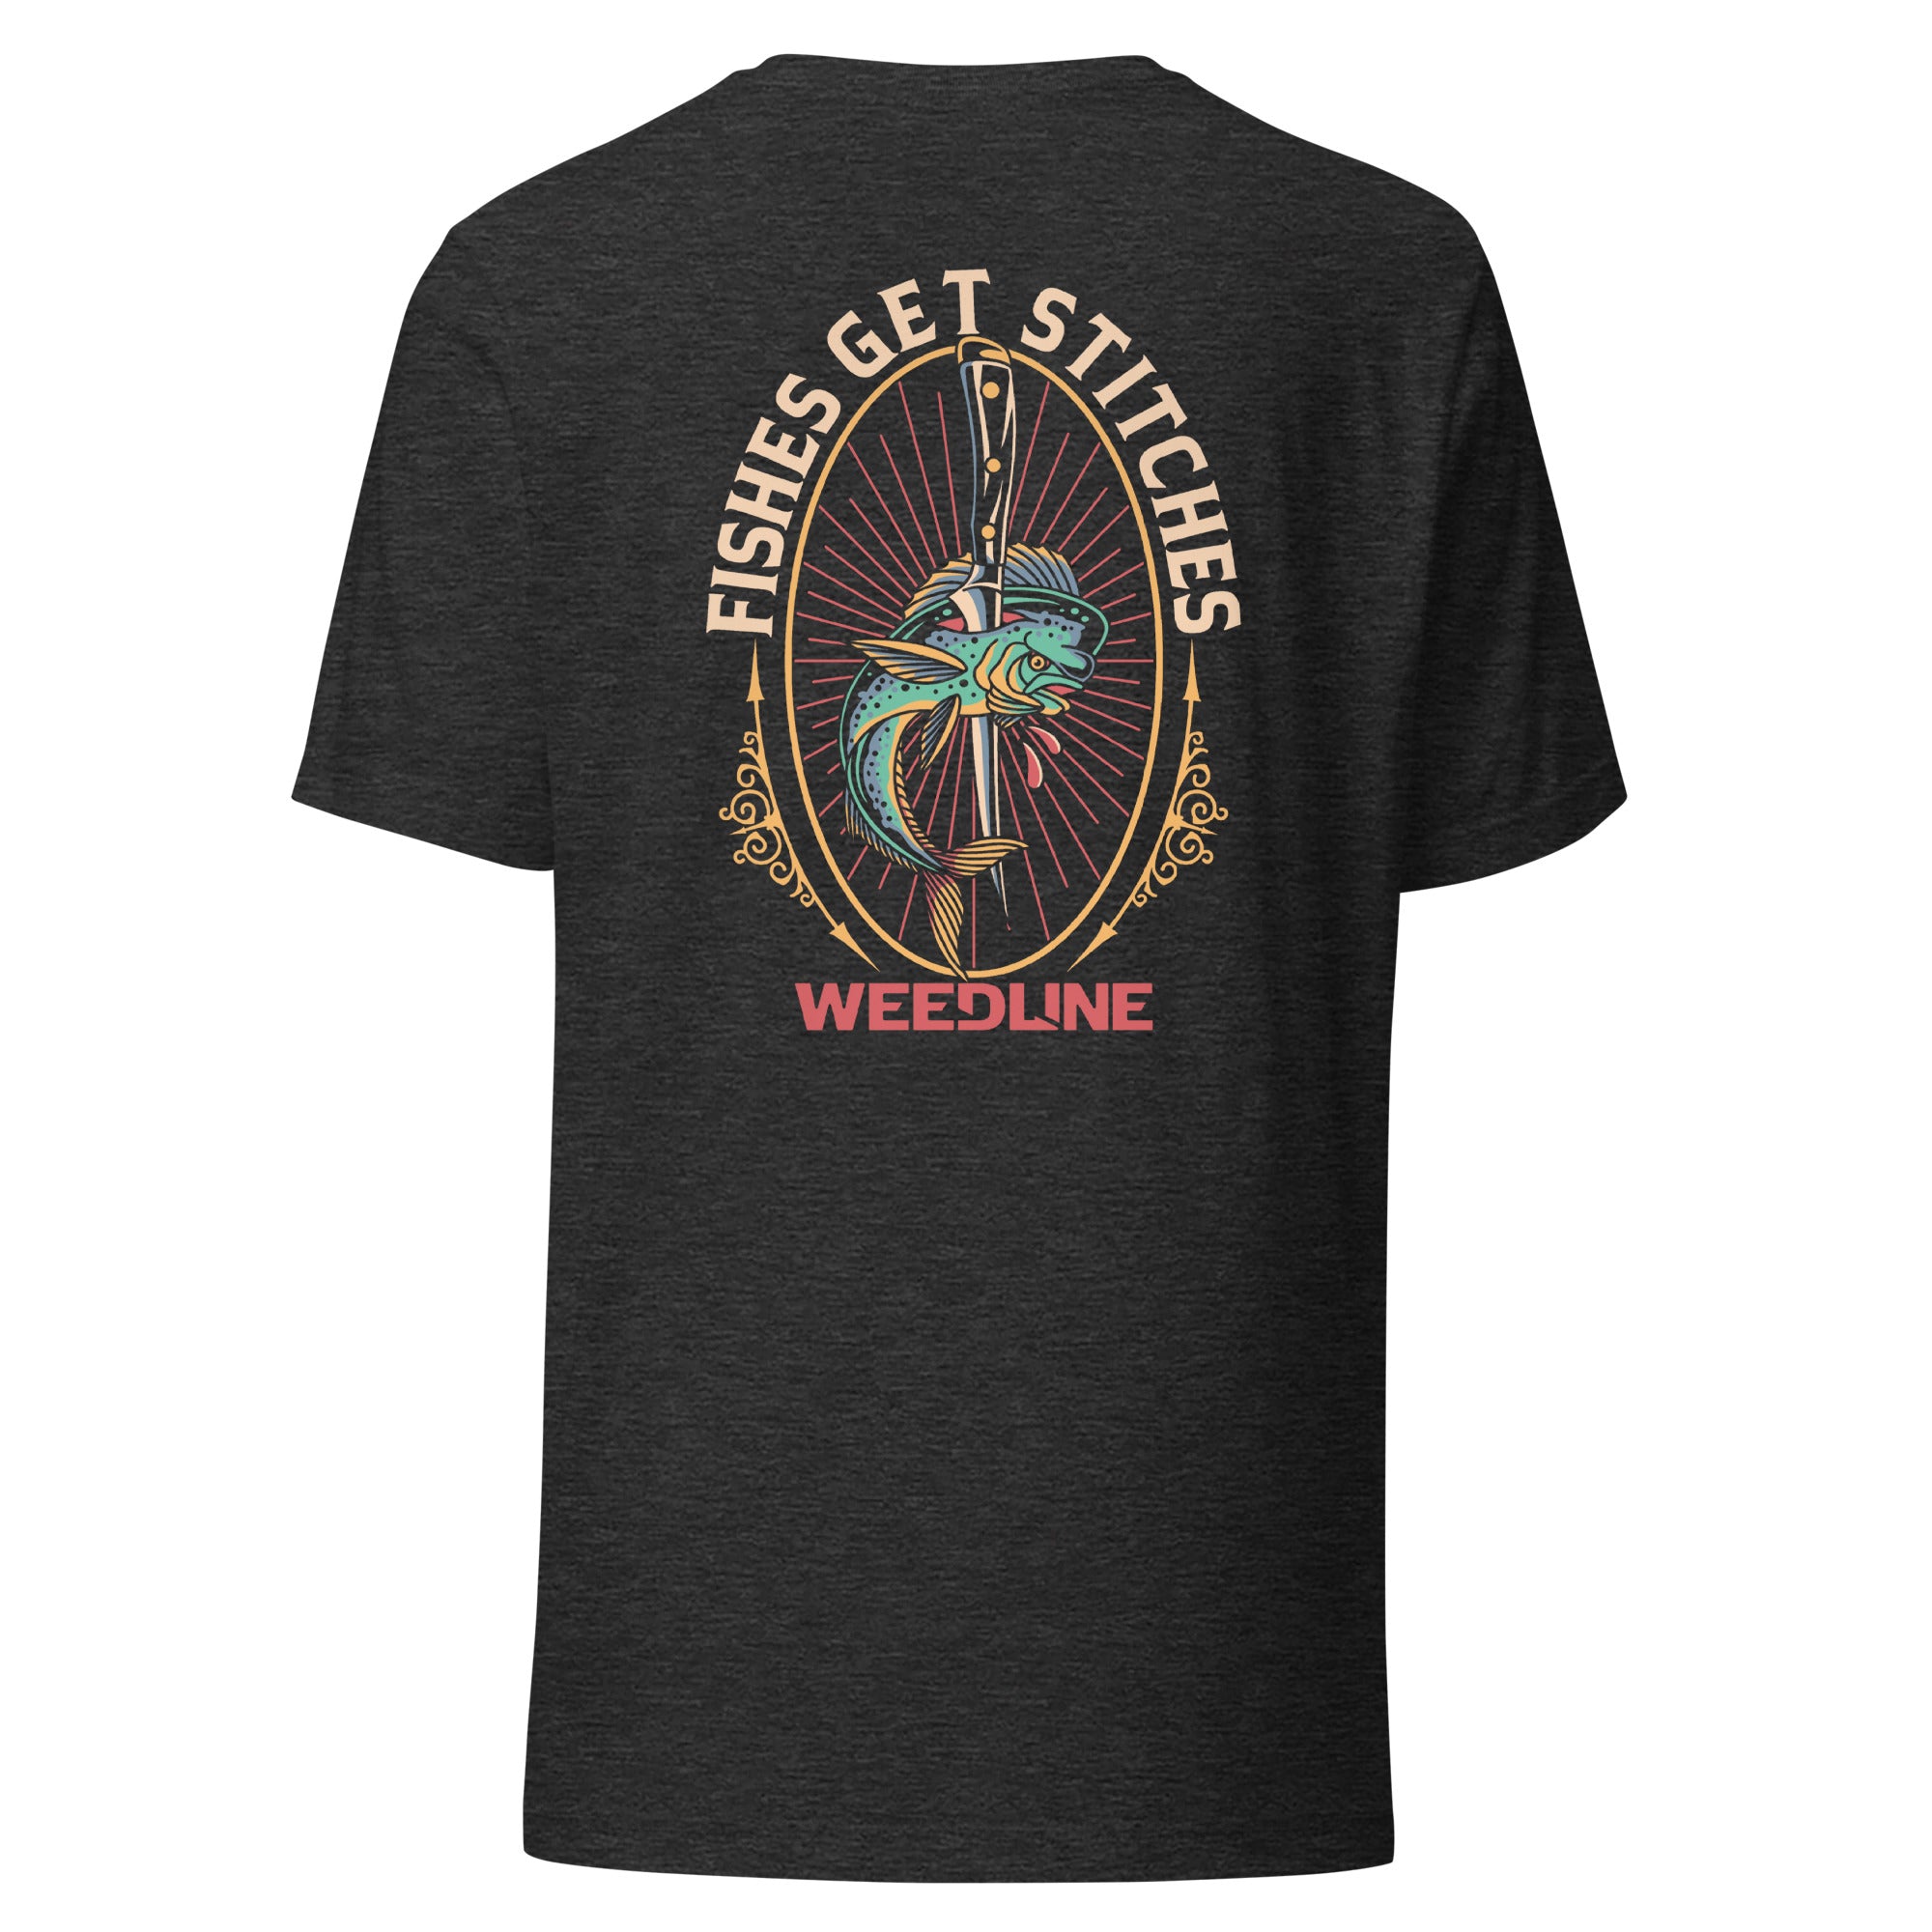 Weedline Fishing Apparel "Fishes Get Stitches"